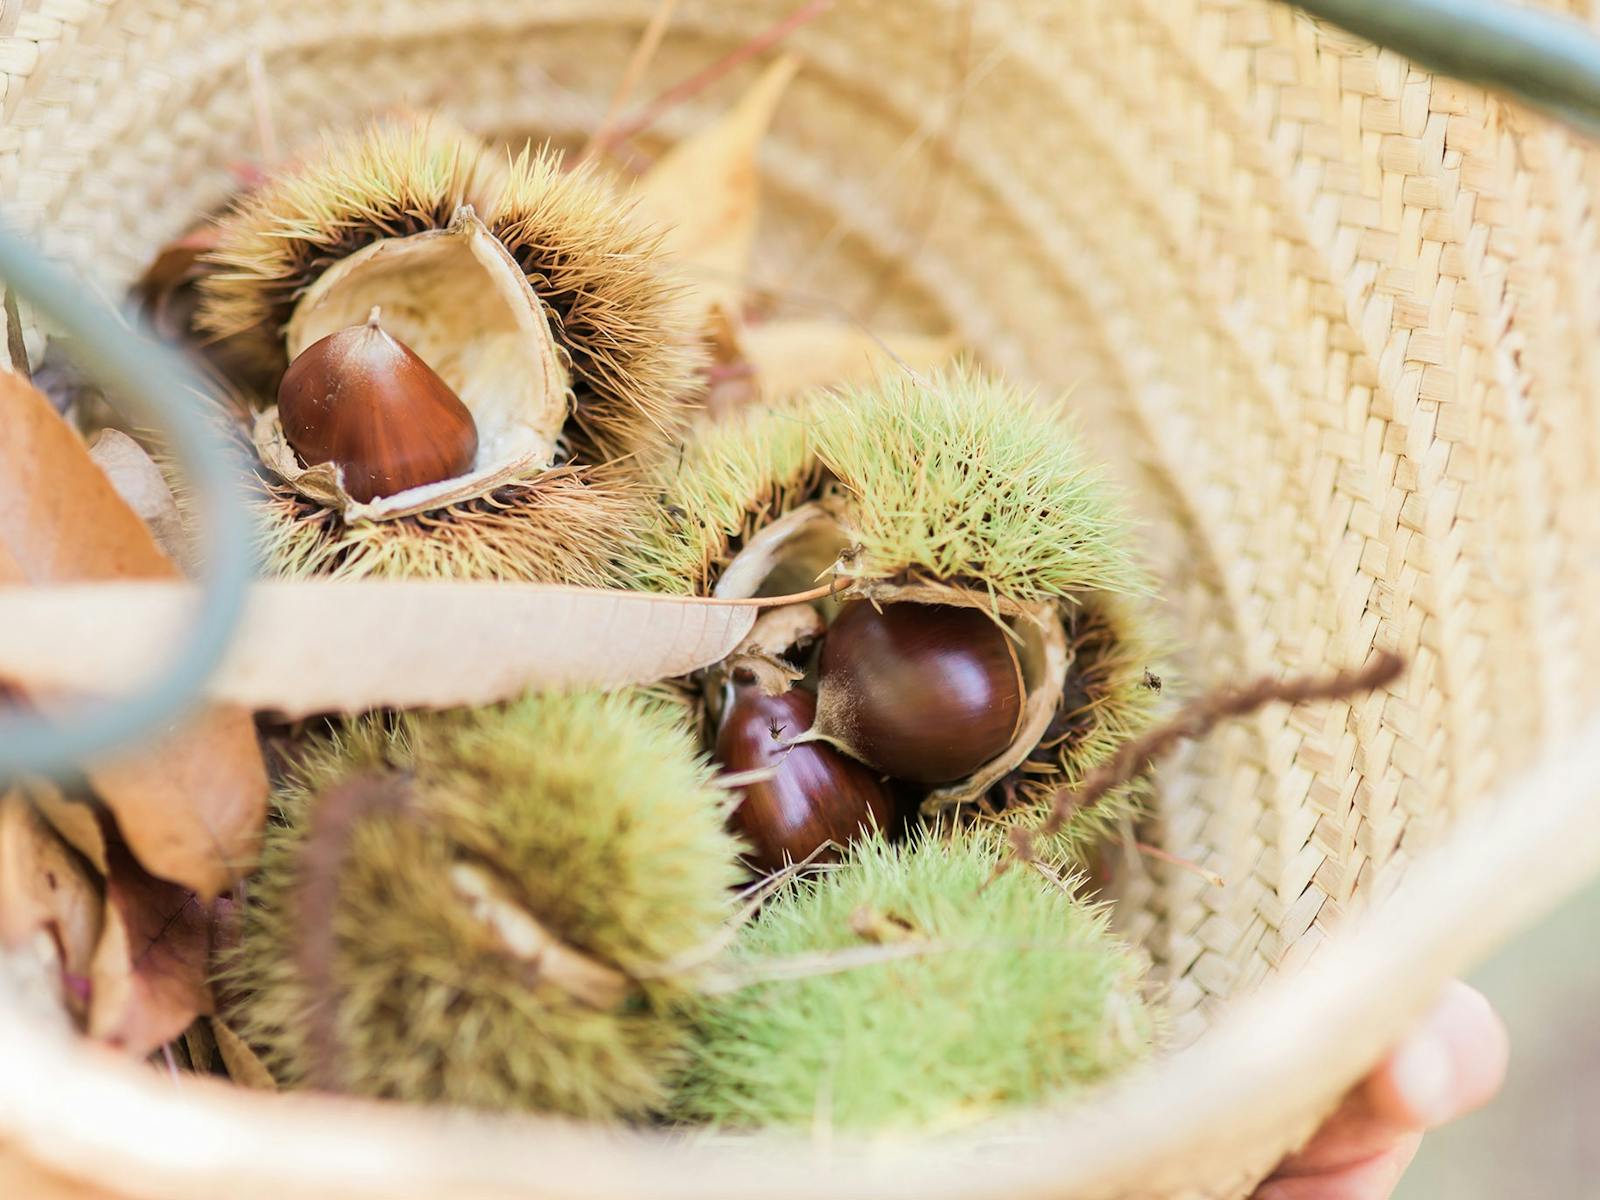 A basket of freshly picked chestnuts